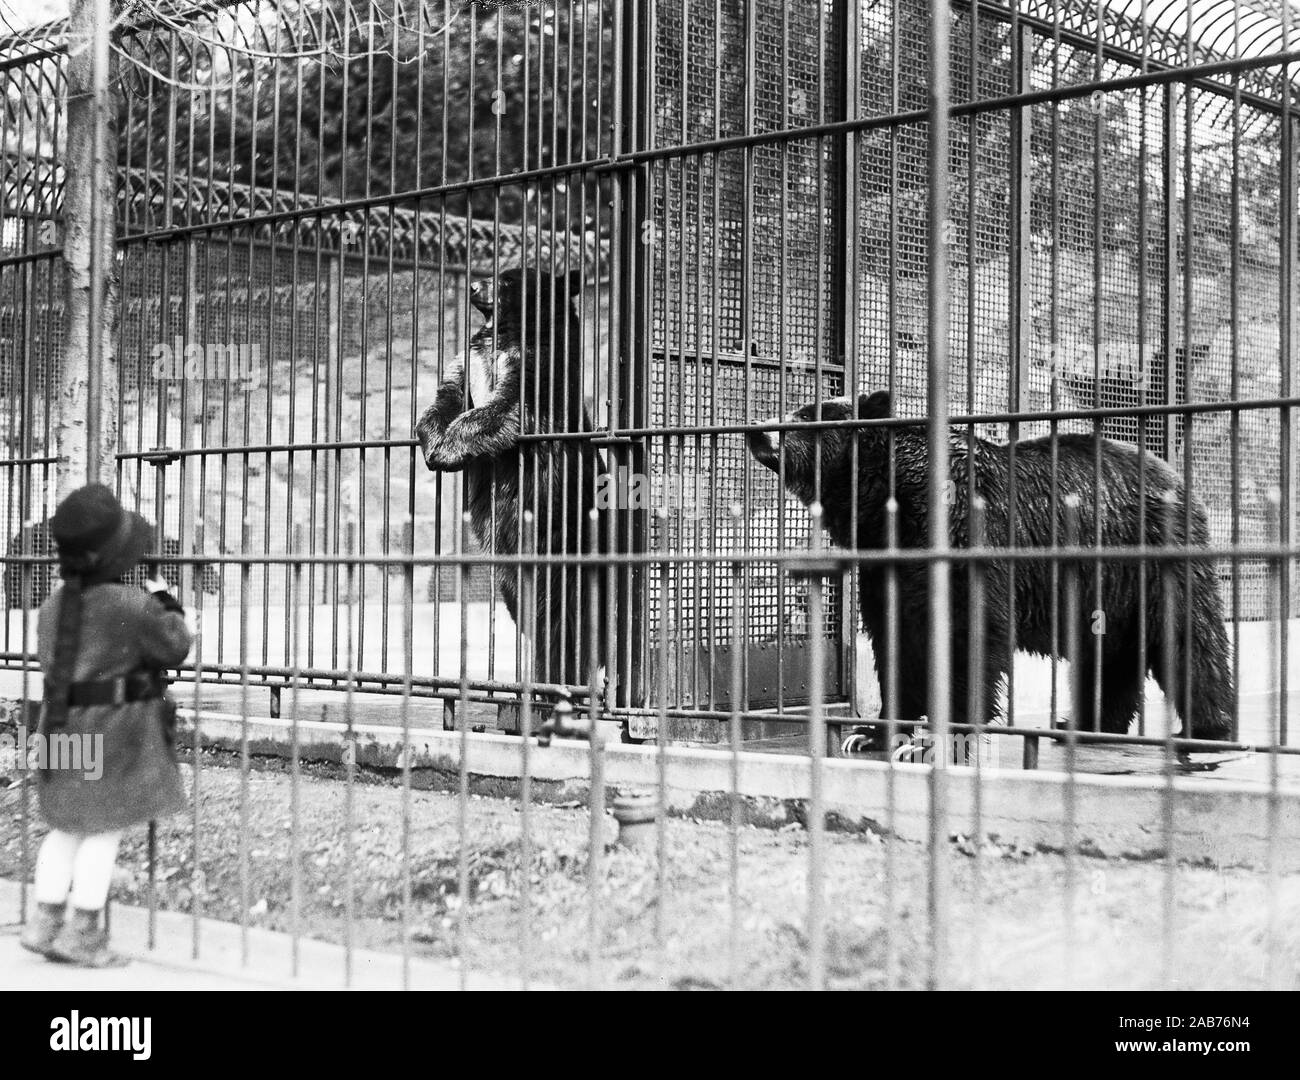 Vintage Zoo High Resolution Stock Photography and Images - Alamy